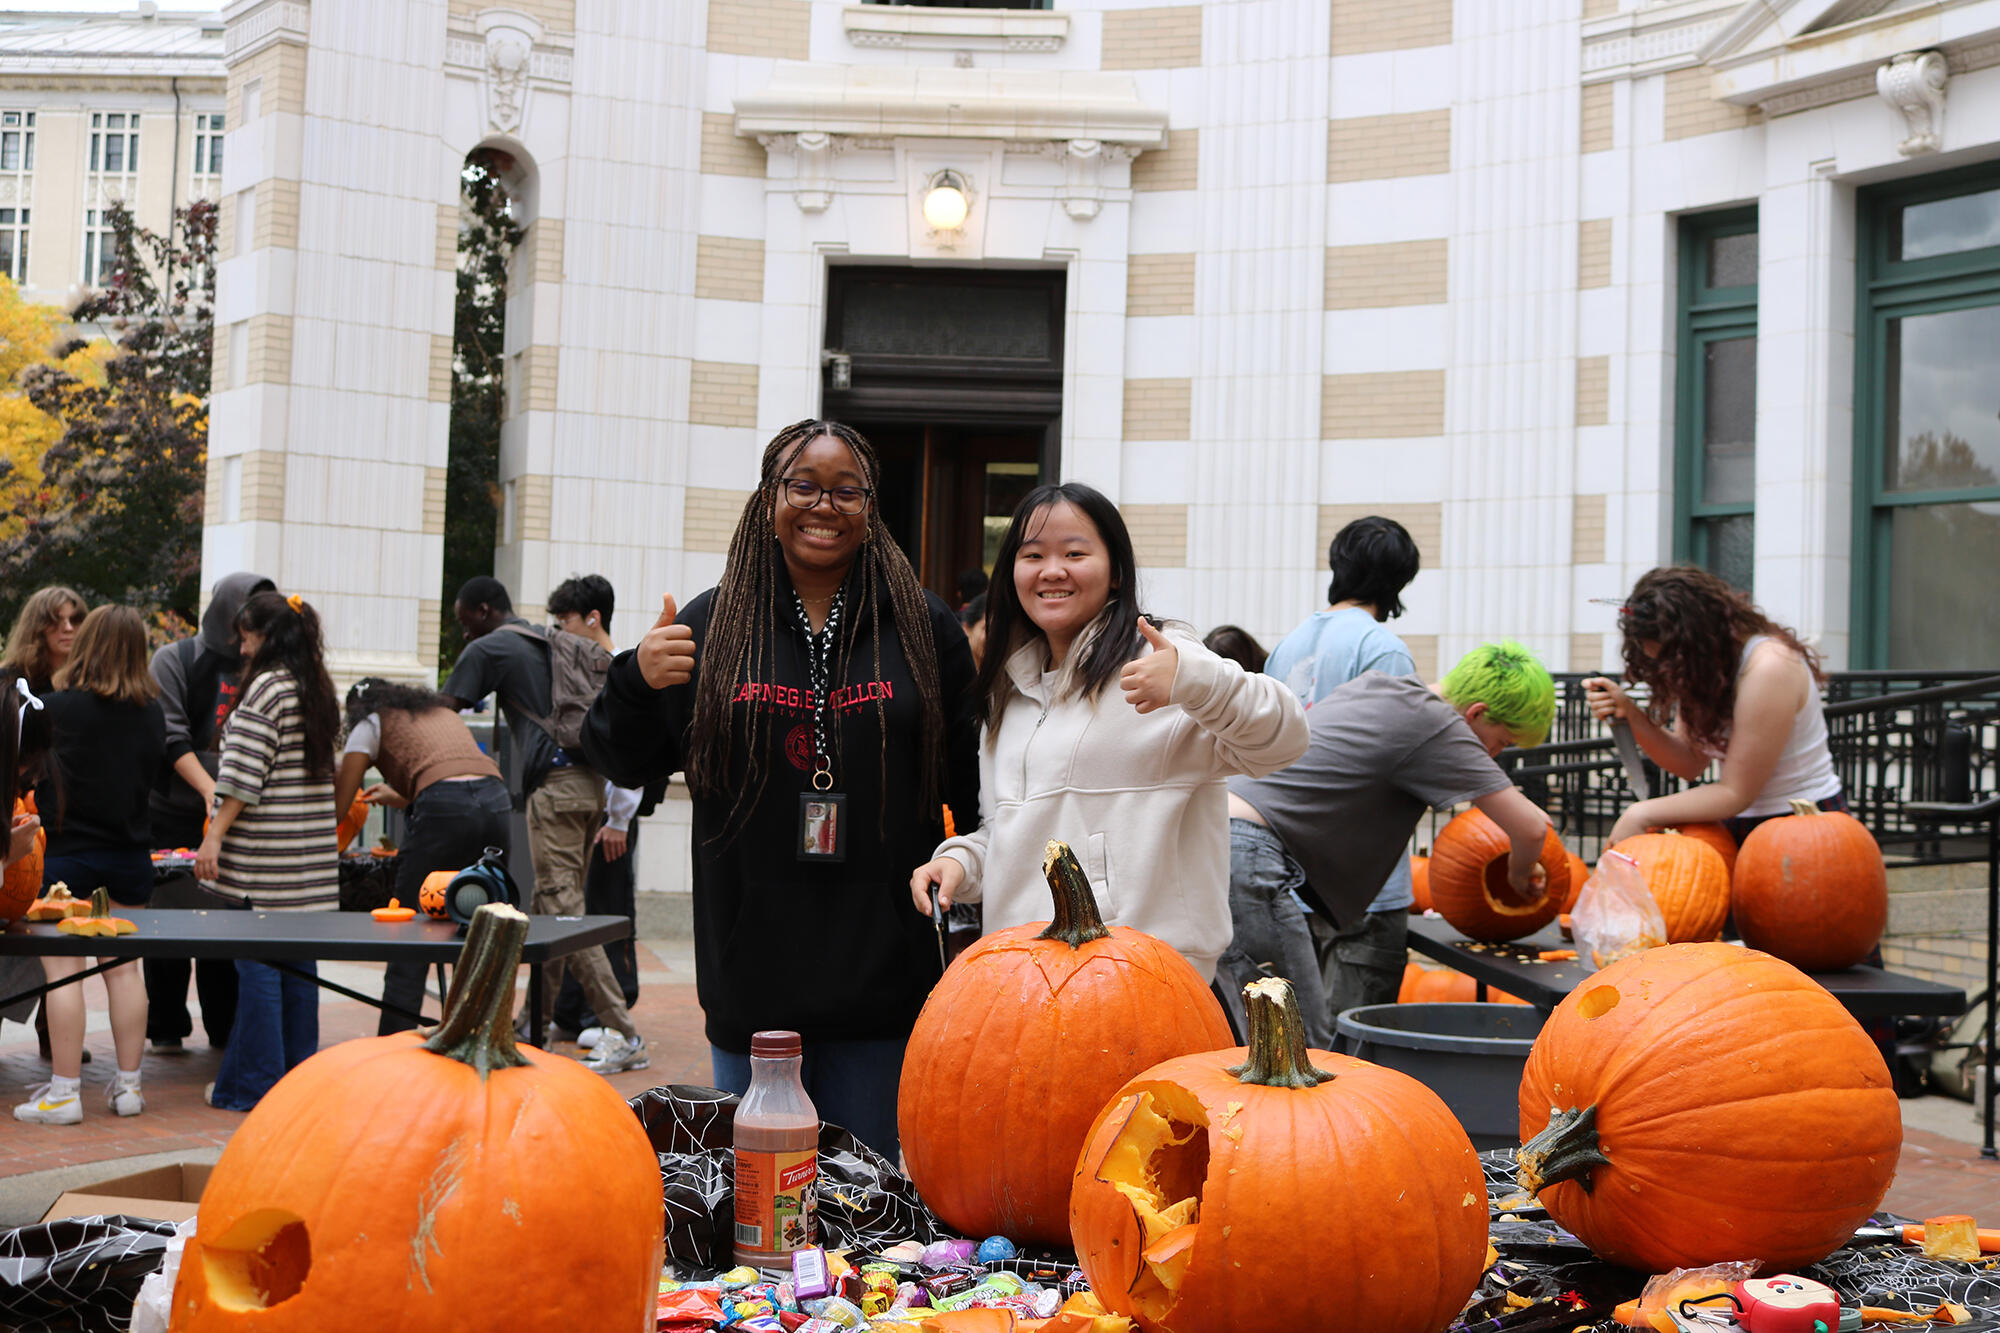 Students giving a thumbs up at a pumpkin carving event.